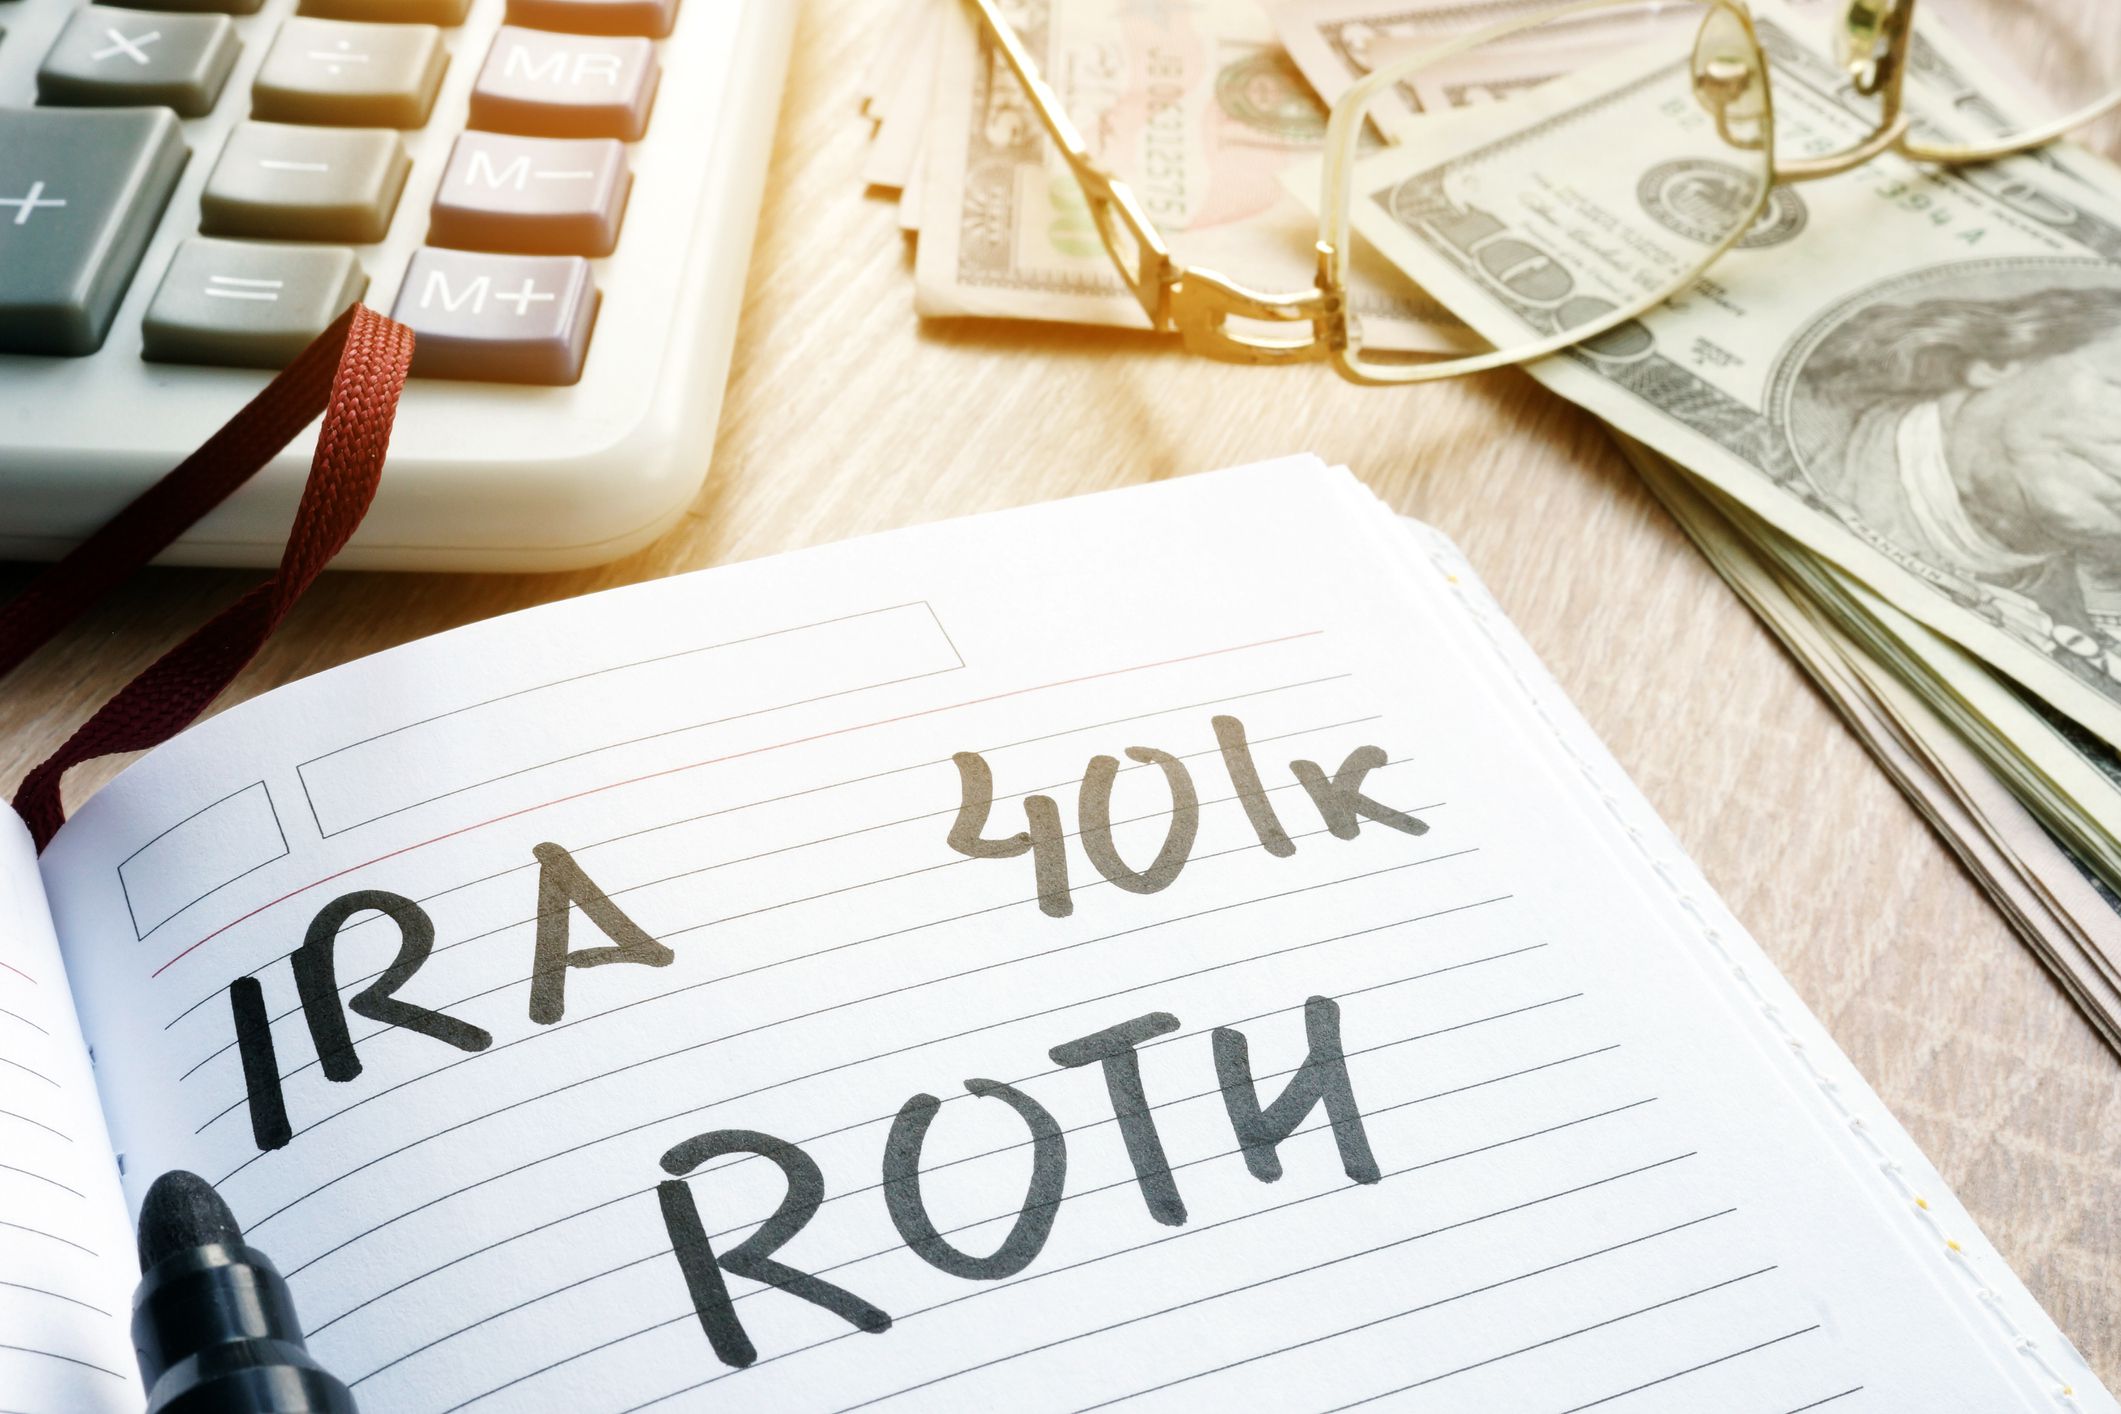 <p>Once you reach age 50, catch-up provisions allow you to increase your tax-advantaged savings in several types of retirement accounts. For a traditional or Roth IRA, the annual catch-up amount is $1,000, boosting your total contribution potential to $7,000. This can be a great way to pump up a nest egg for retirement in a tax-smart way, Assaf says. </p><p><b>Related:</b> <a href="https://blog.cheapism.com/money-mistakes-to-avoid-over-50/">Living Large and Other Top Money Mistakes People Make in Their 50s</a></p>